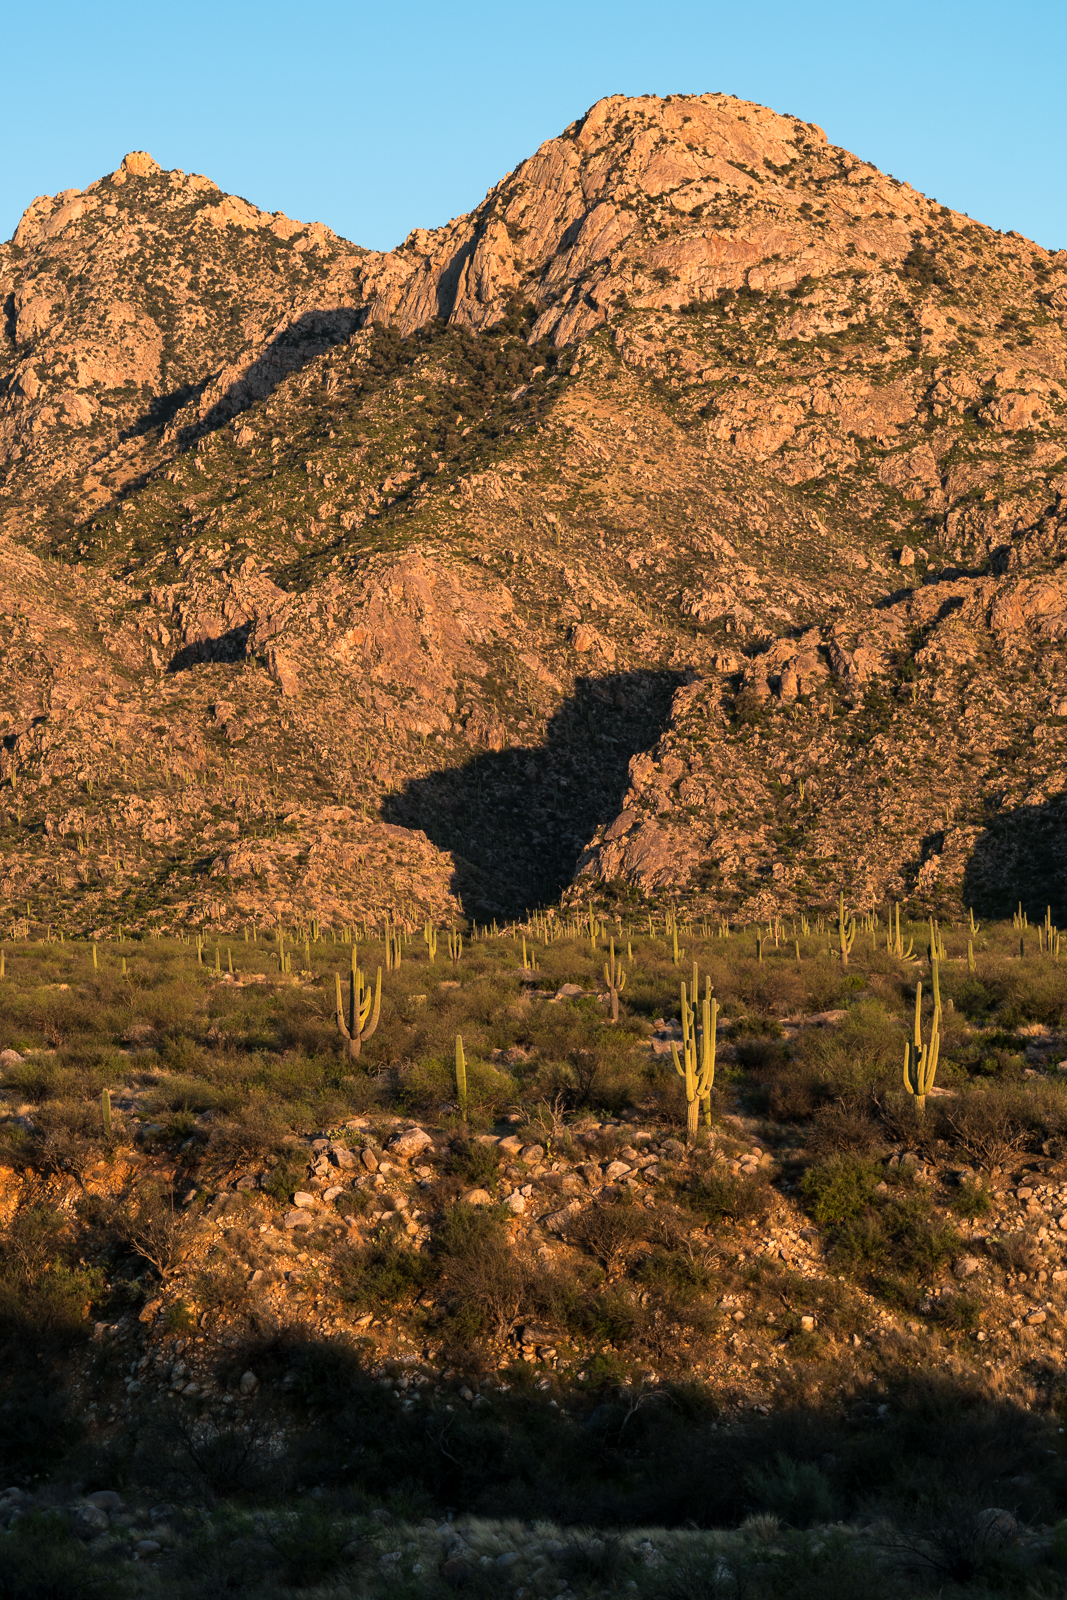 Romero Canyon - marked by the shadow in the middle of the picture - exiting the mountains and heading into Catalina State Park. March 2016.